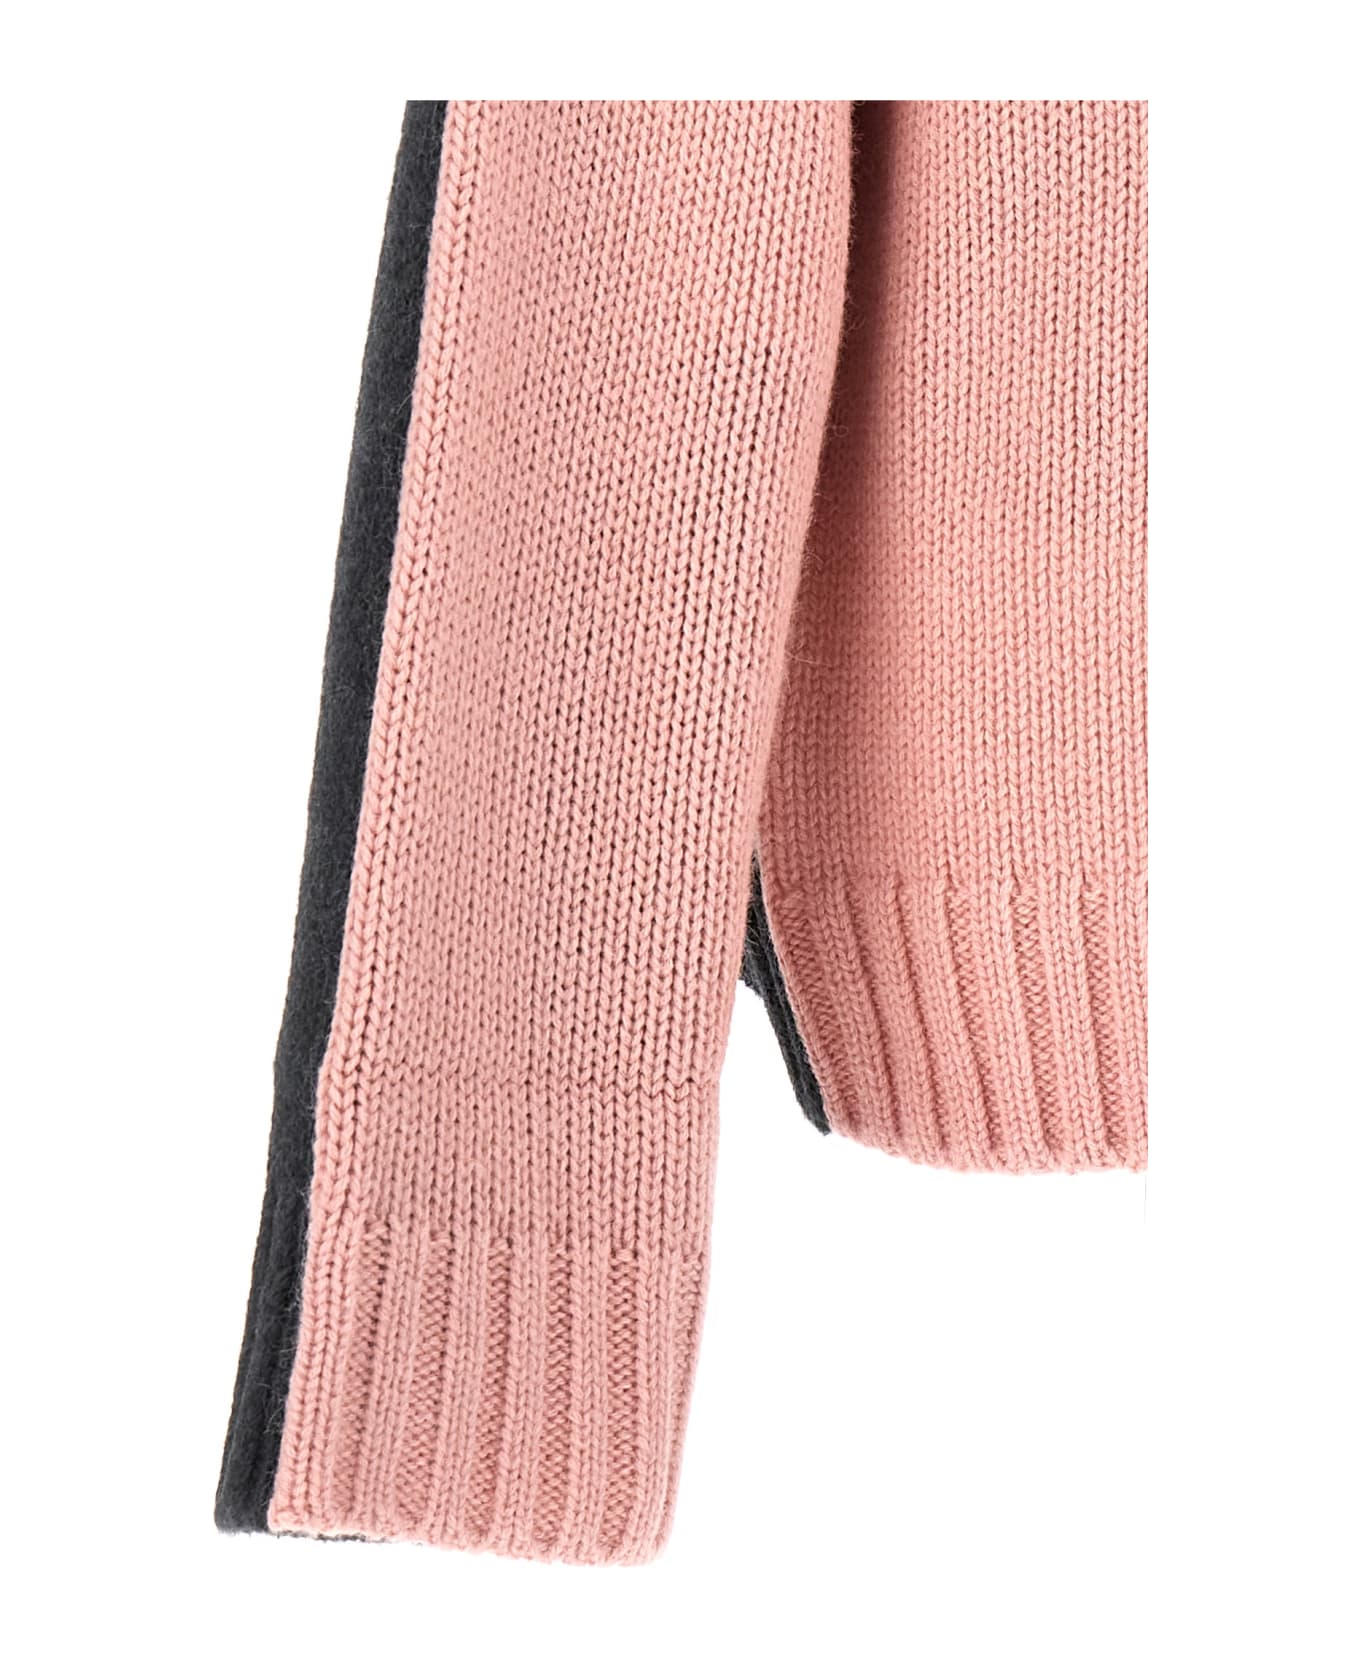 J.W. Anderson Logo Embroidery Two-color Sweater - PINK/GREY